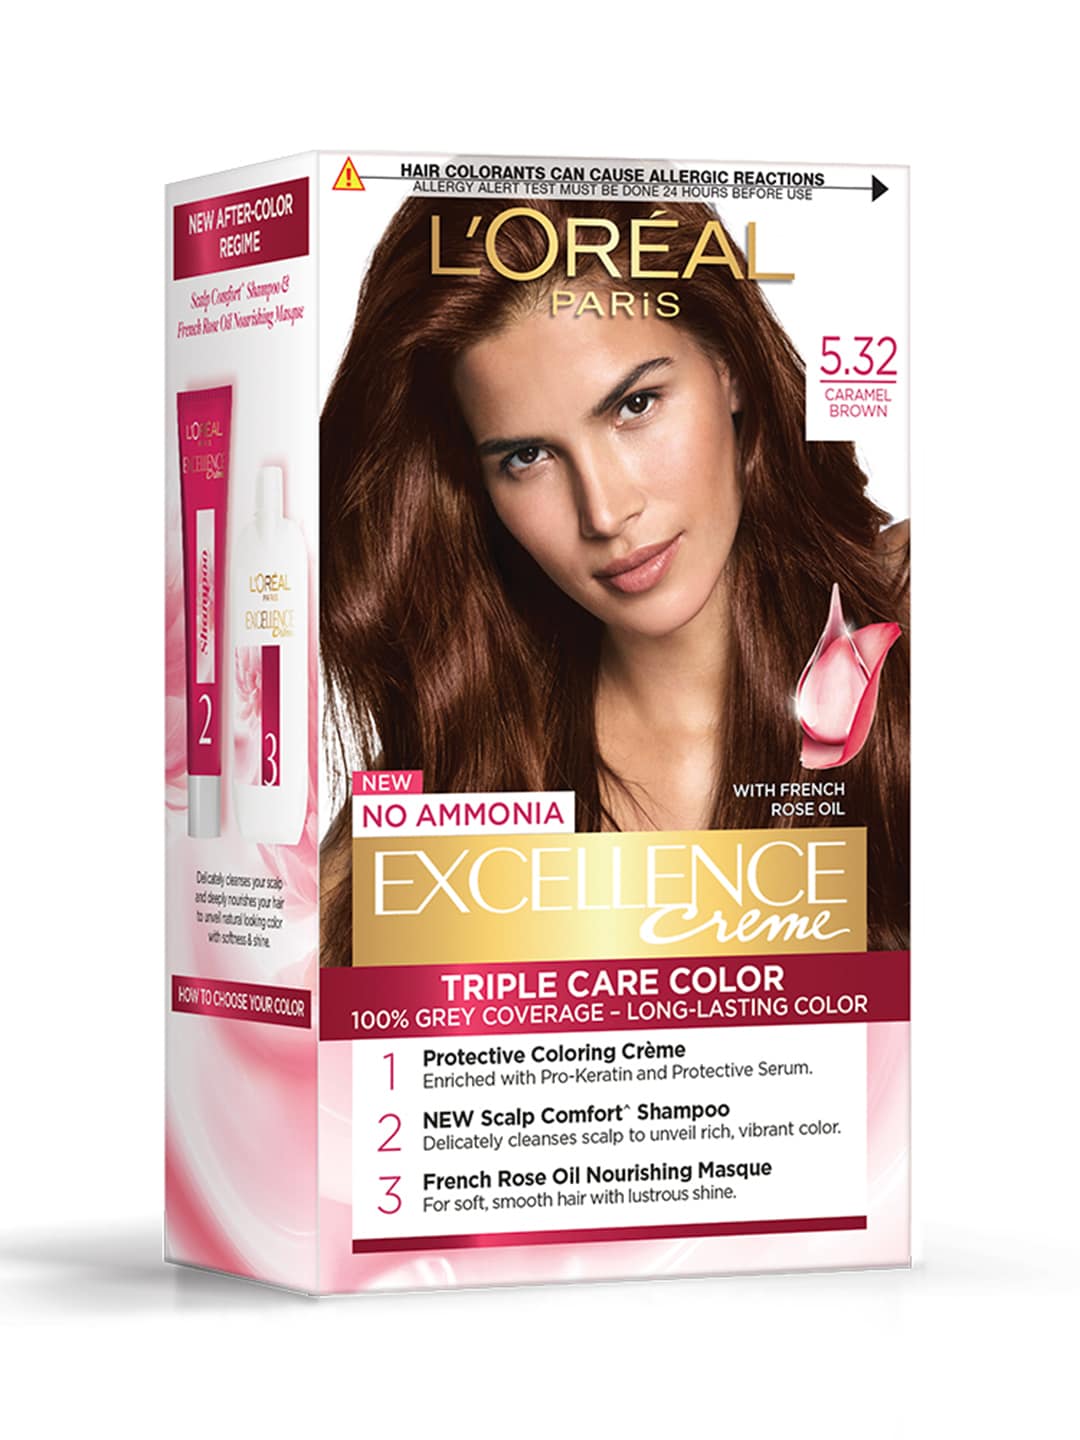 LOreal Paris Excellence Creme Triple Care Hair Color 72 ml+100g - Caramel Brown 5.32 Price in India